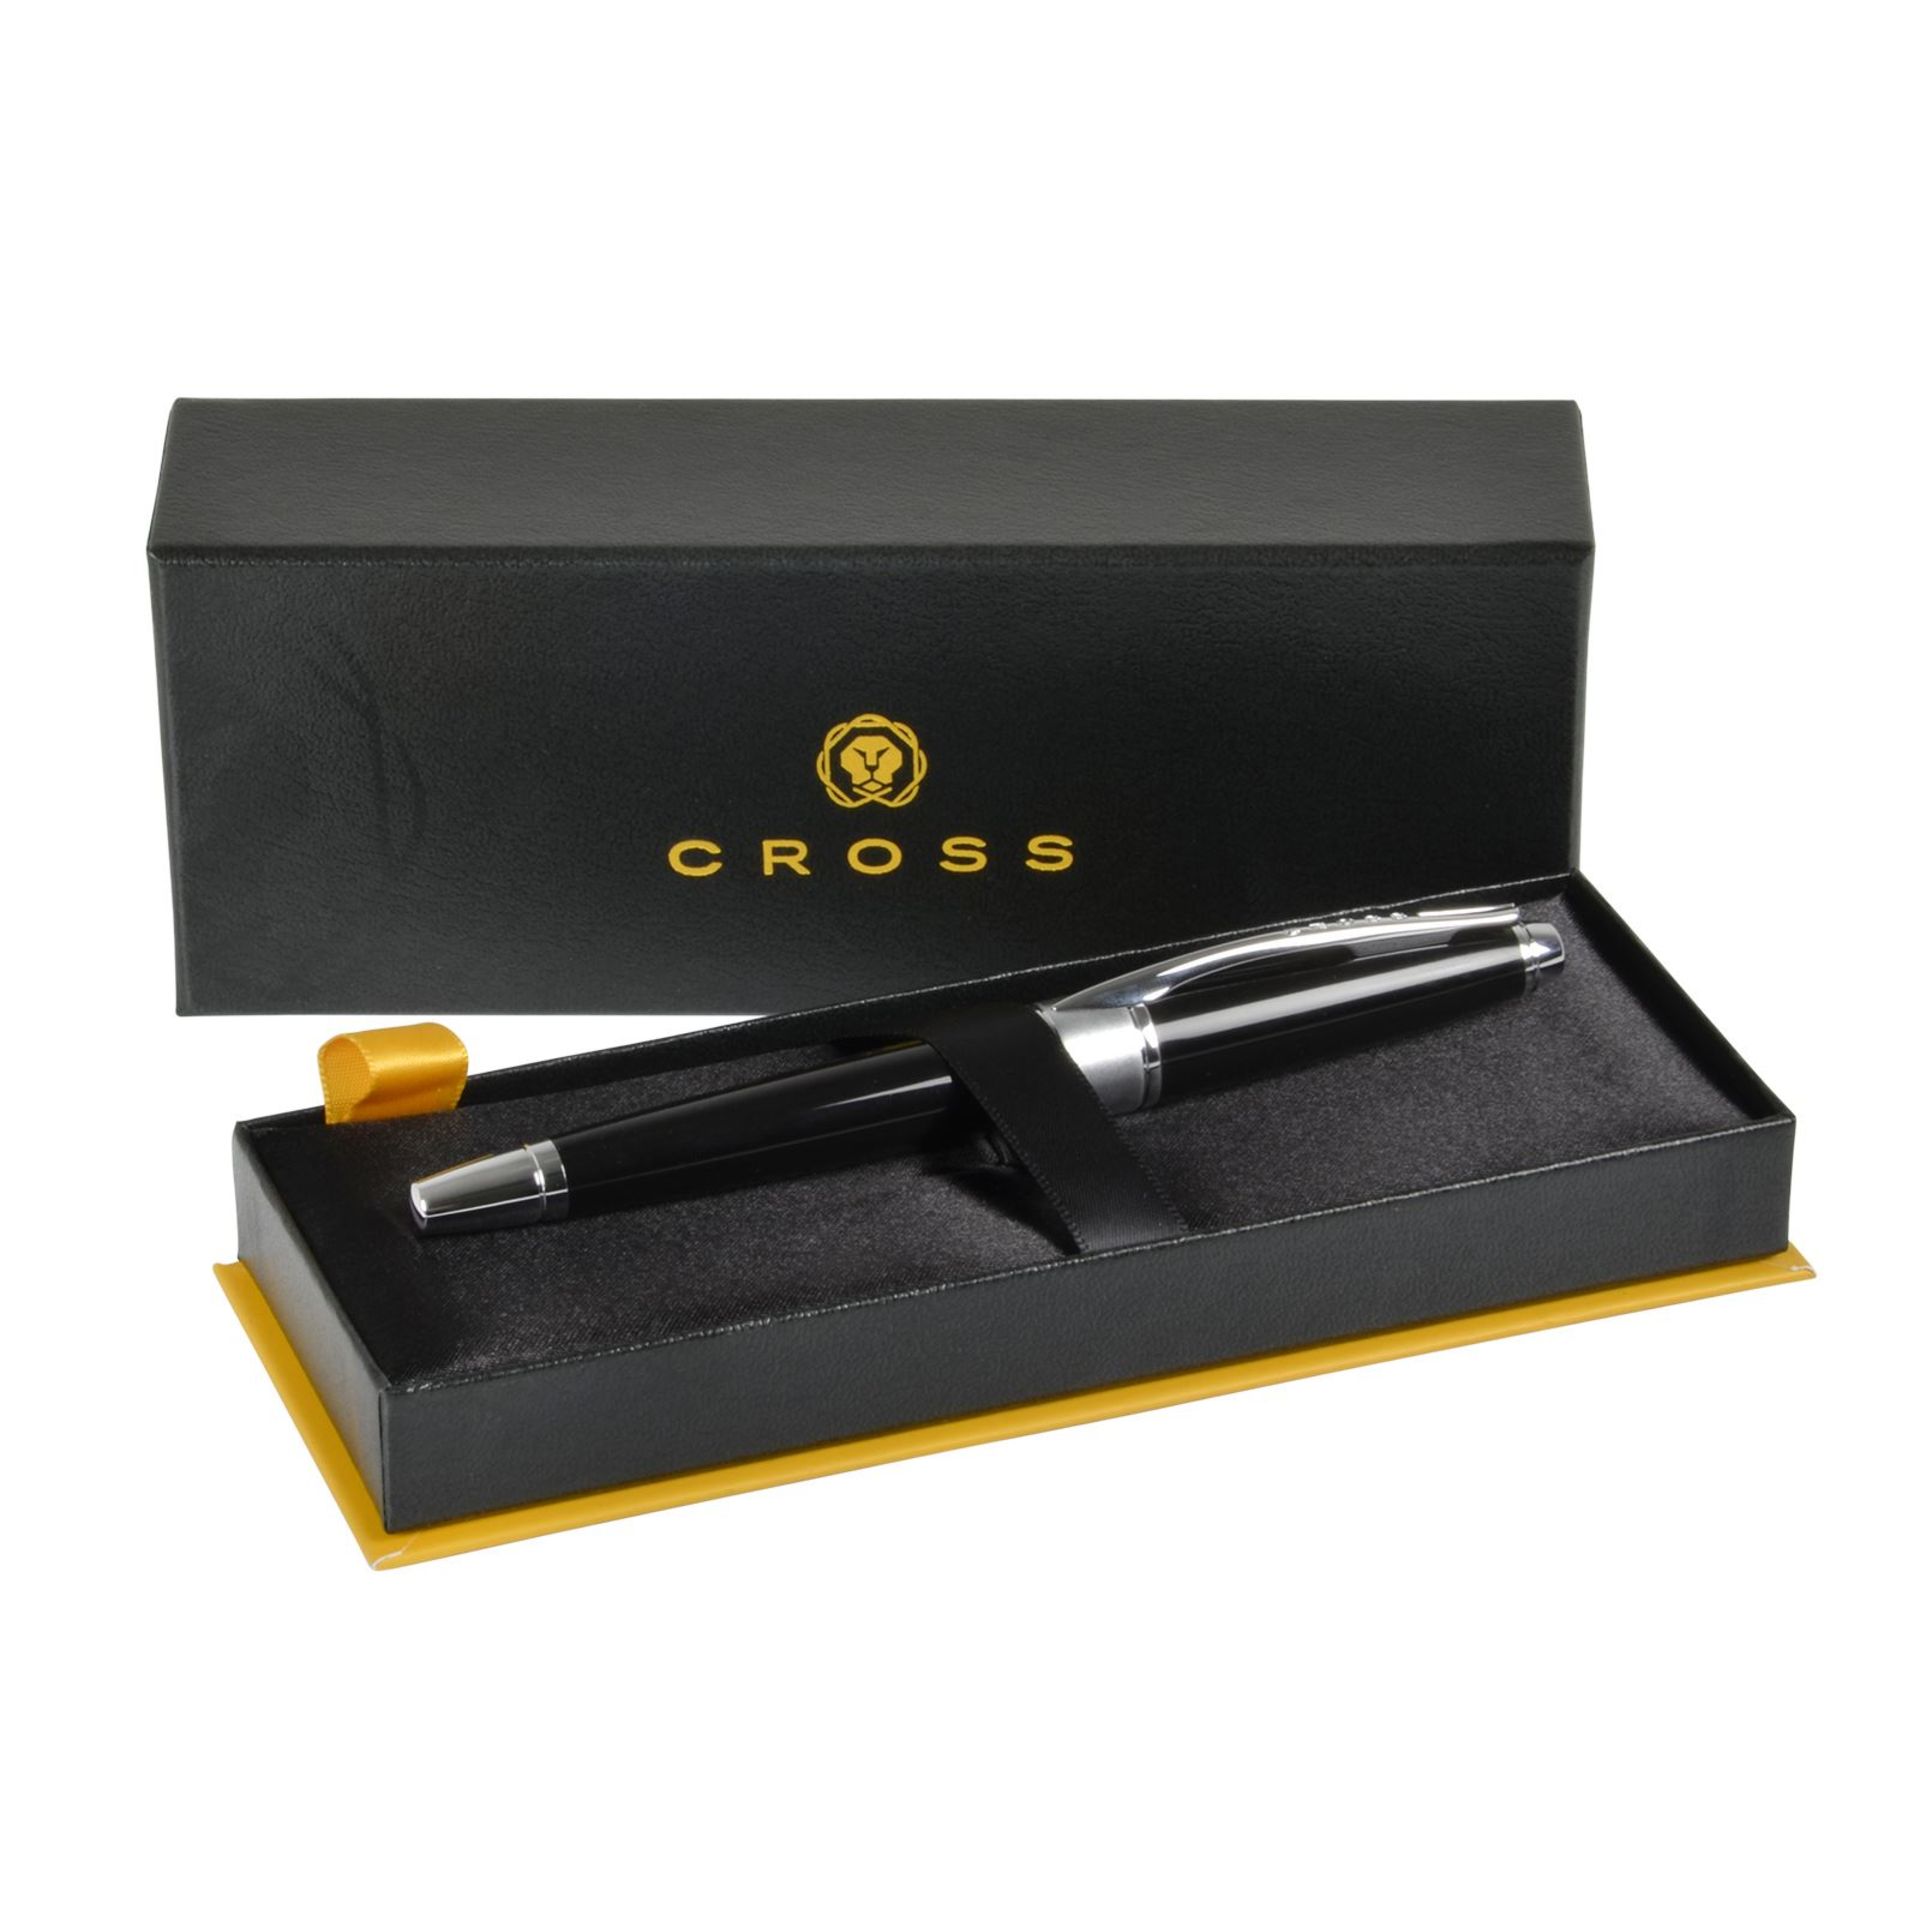 + VAT Brand New Cross Apogee Black Lacquer Rollerball Pen With Chrome Trim In Presentation Box - WH - Image 2 of 2